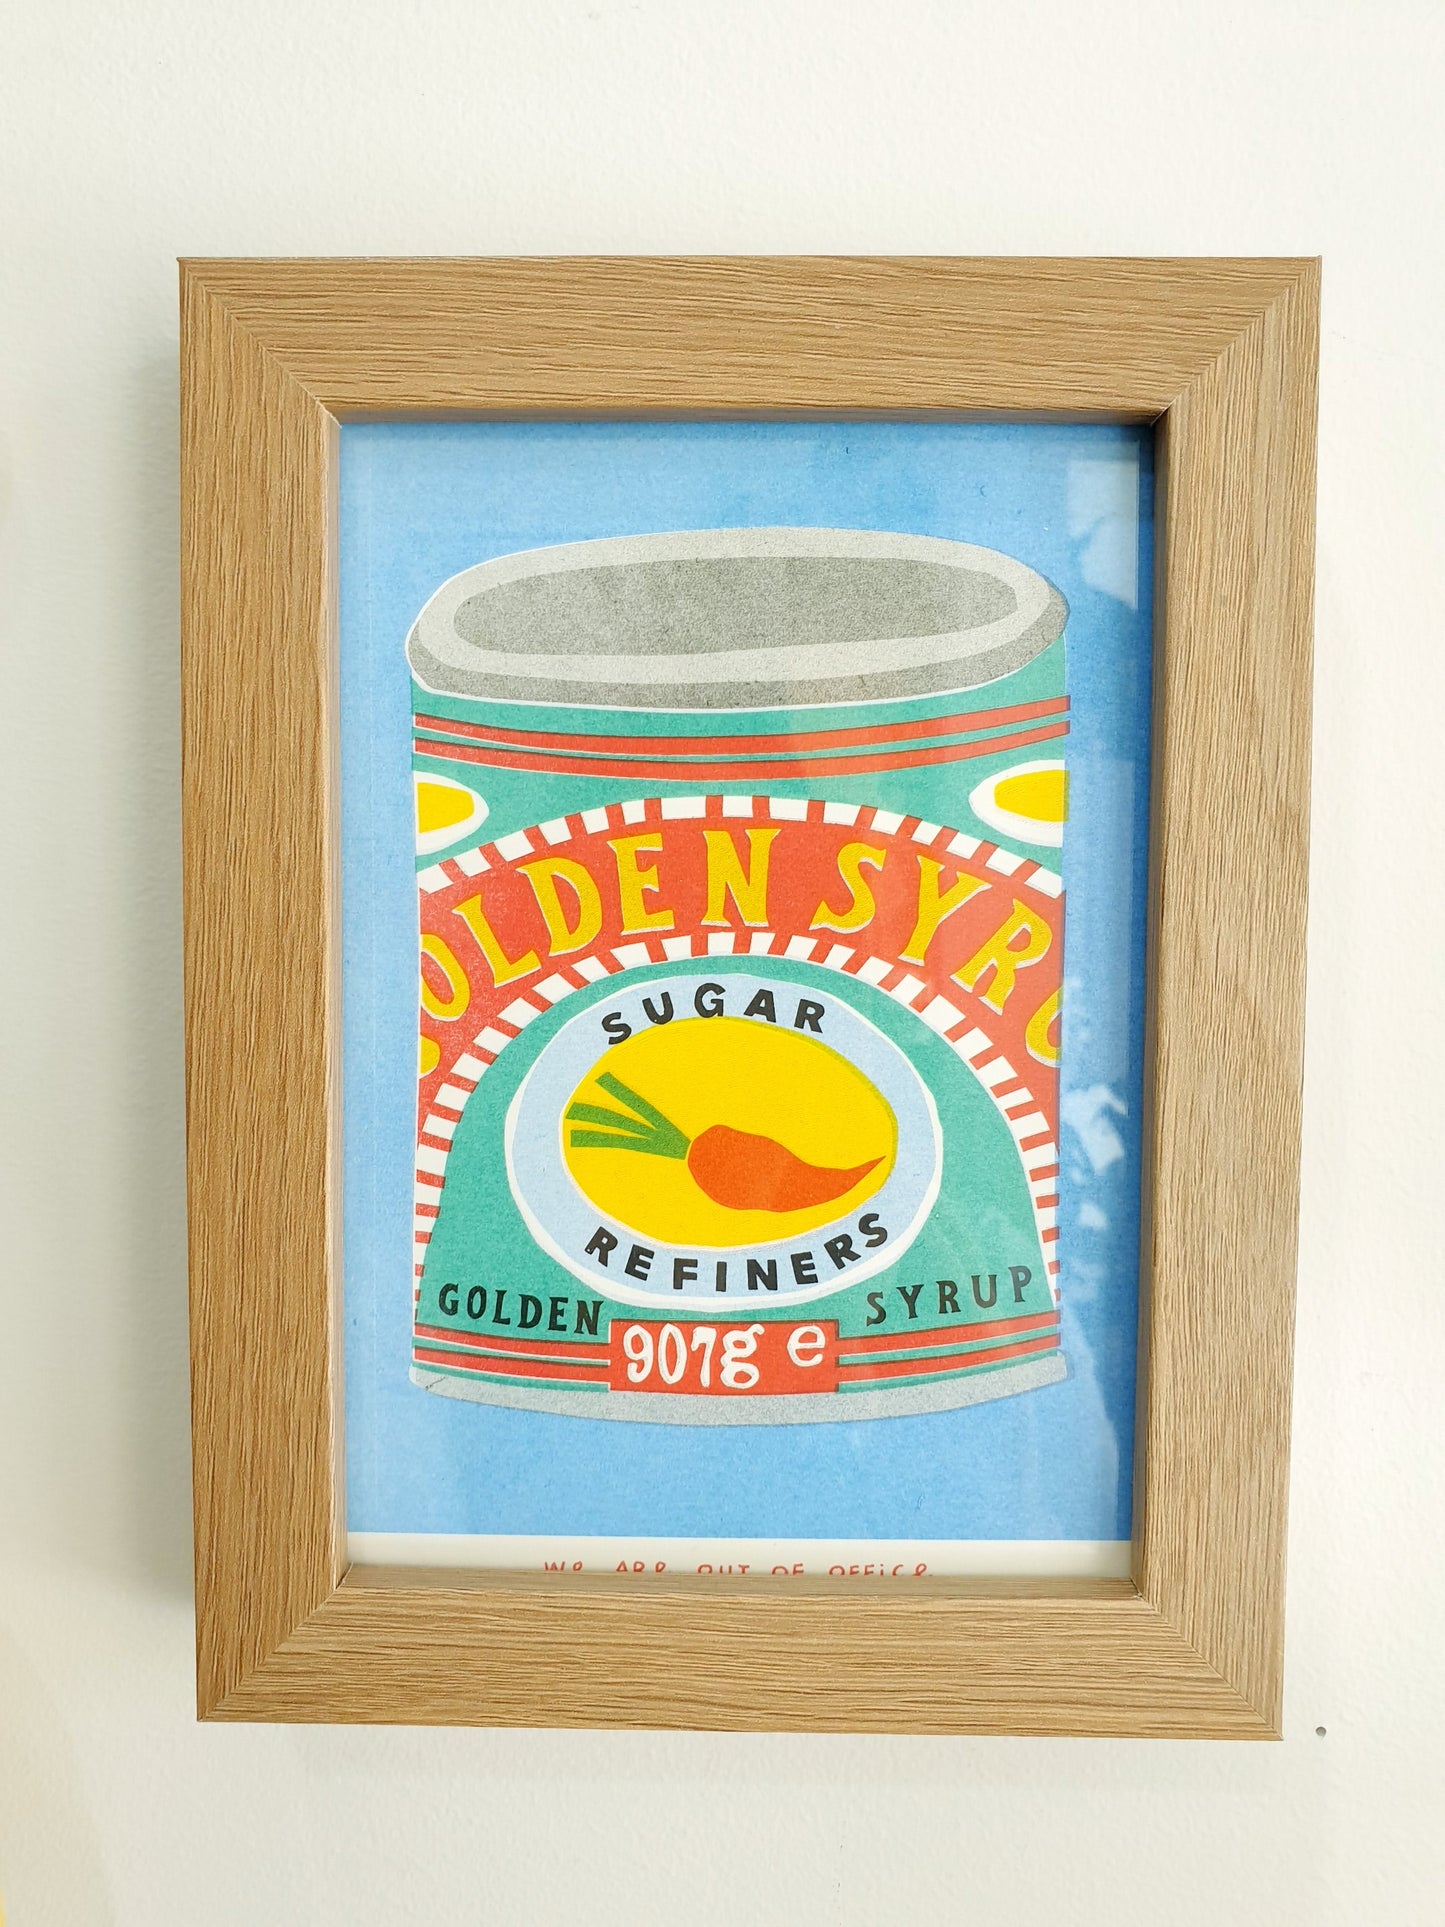 'A can of golden syrup' - A framed risograph print by 'We are out of office'